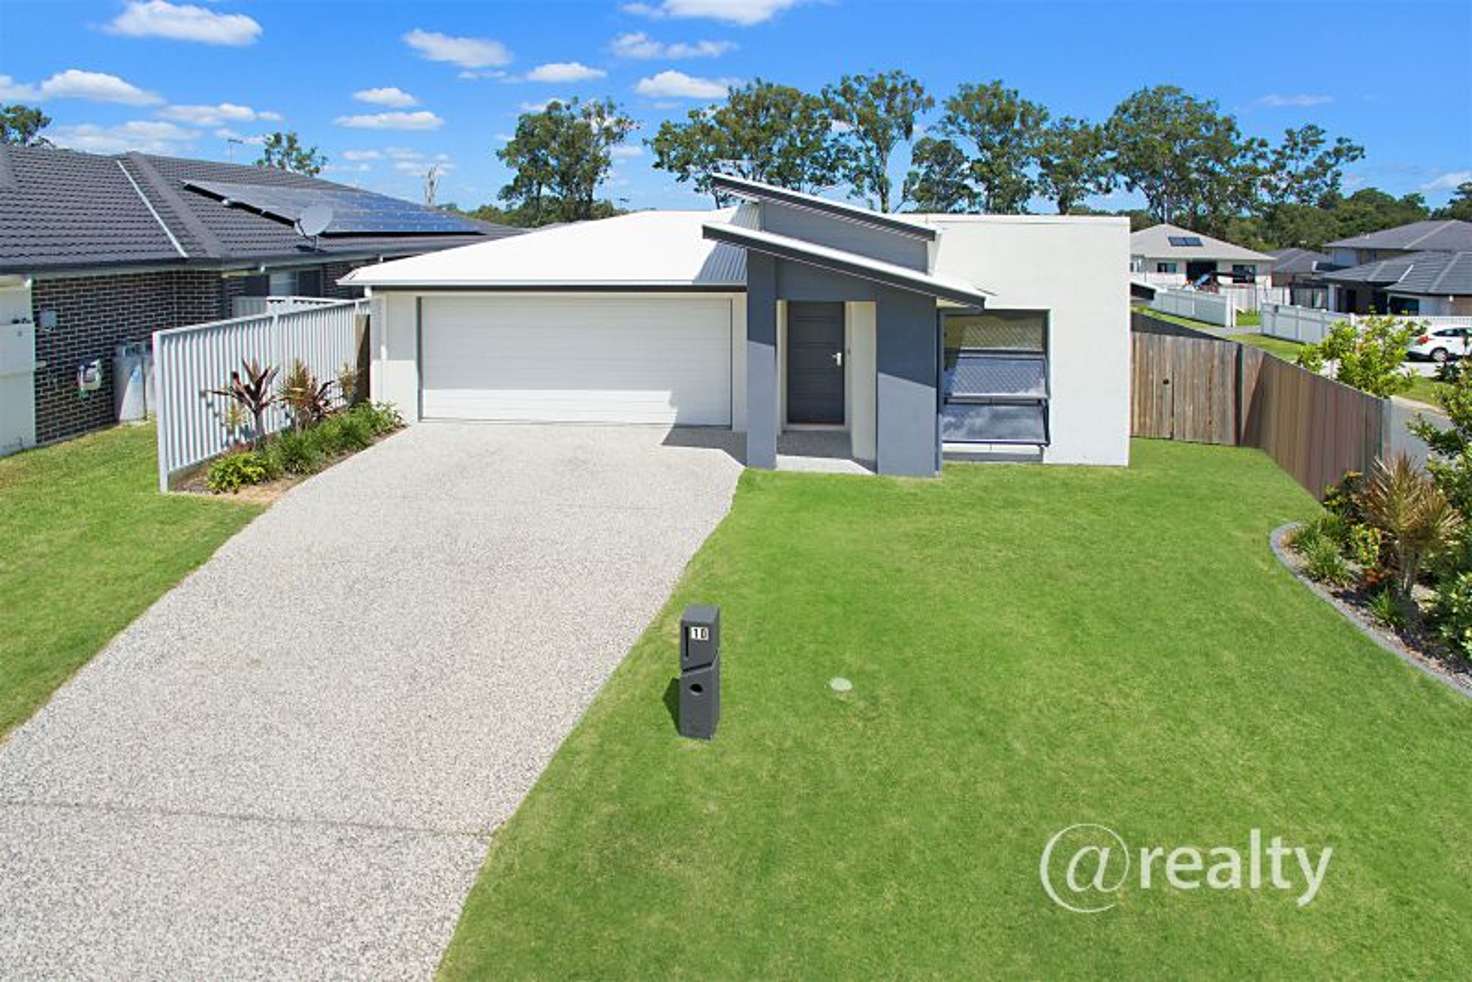 Main view of Homely house listing, 10 Riverside Circuit, Joyner QLD 4500